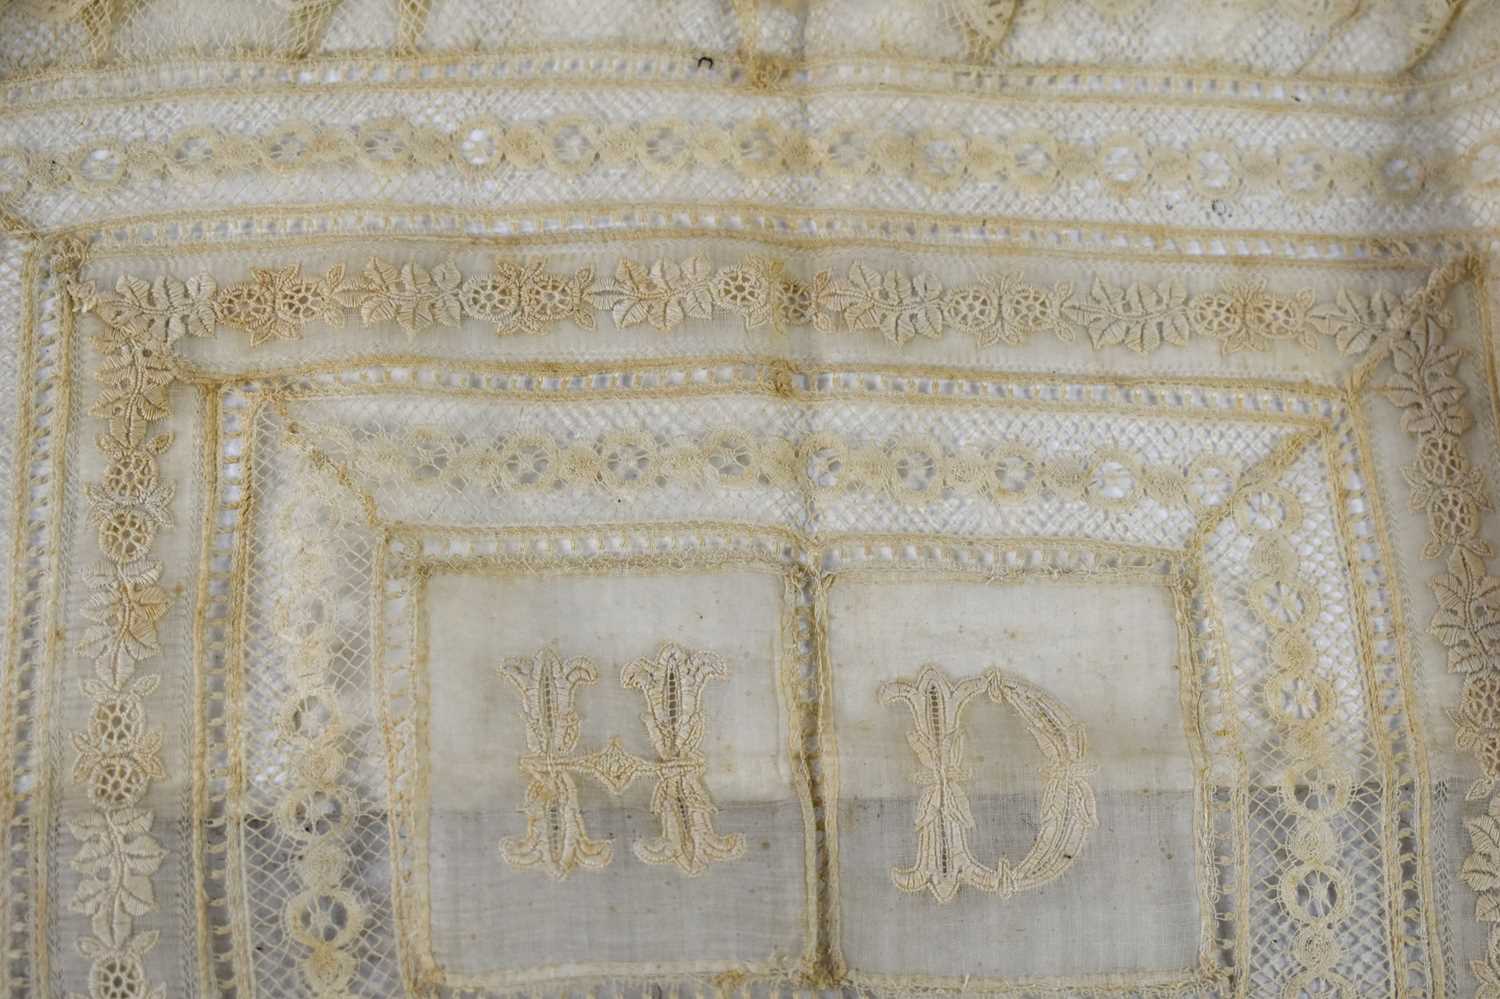 A collection of antique lace and embroidered net to include dress pieces, handkerchiefs, collars, - Image 6 of 11